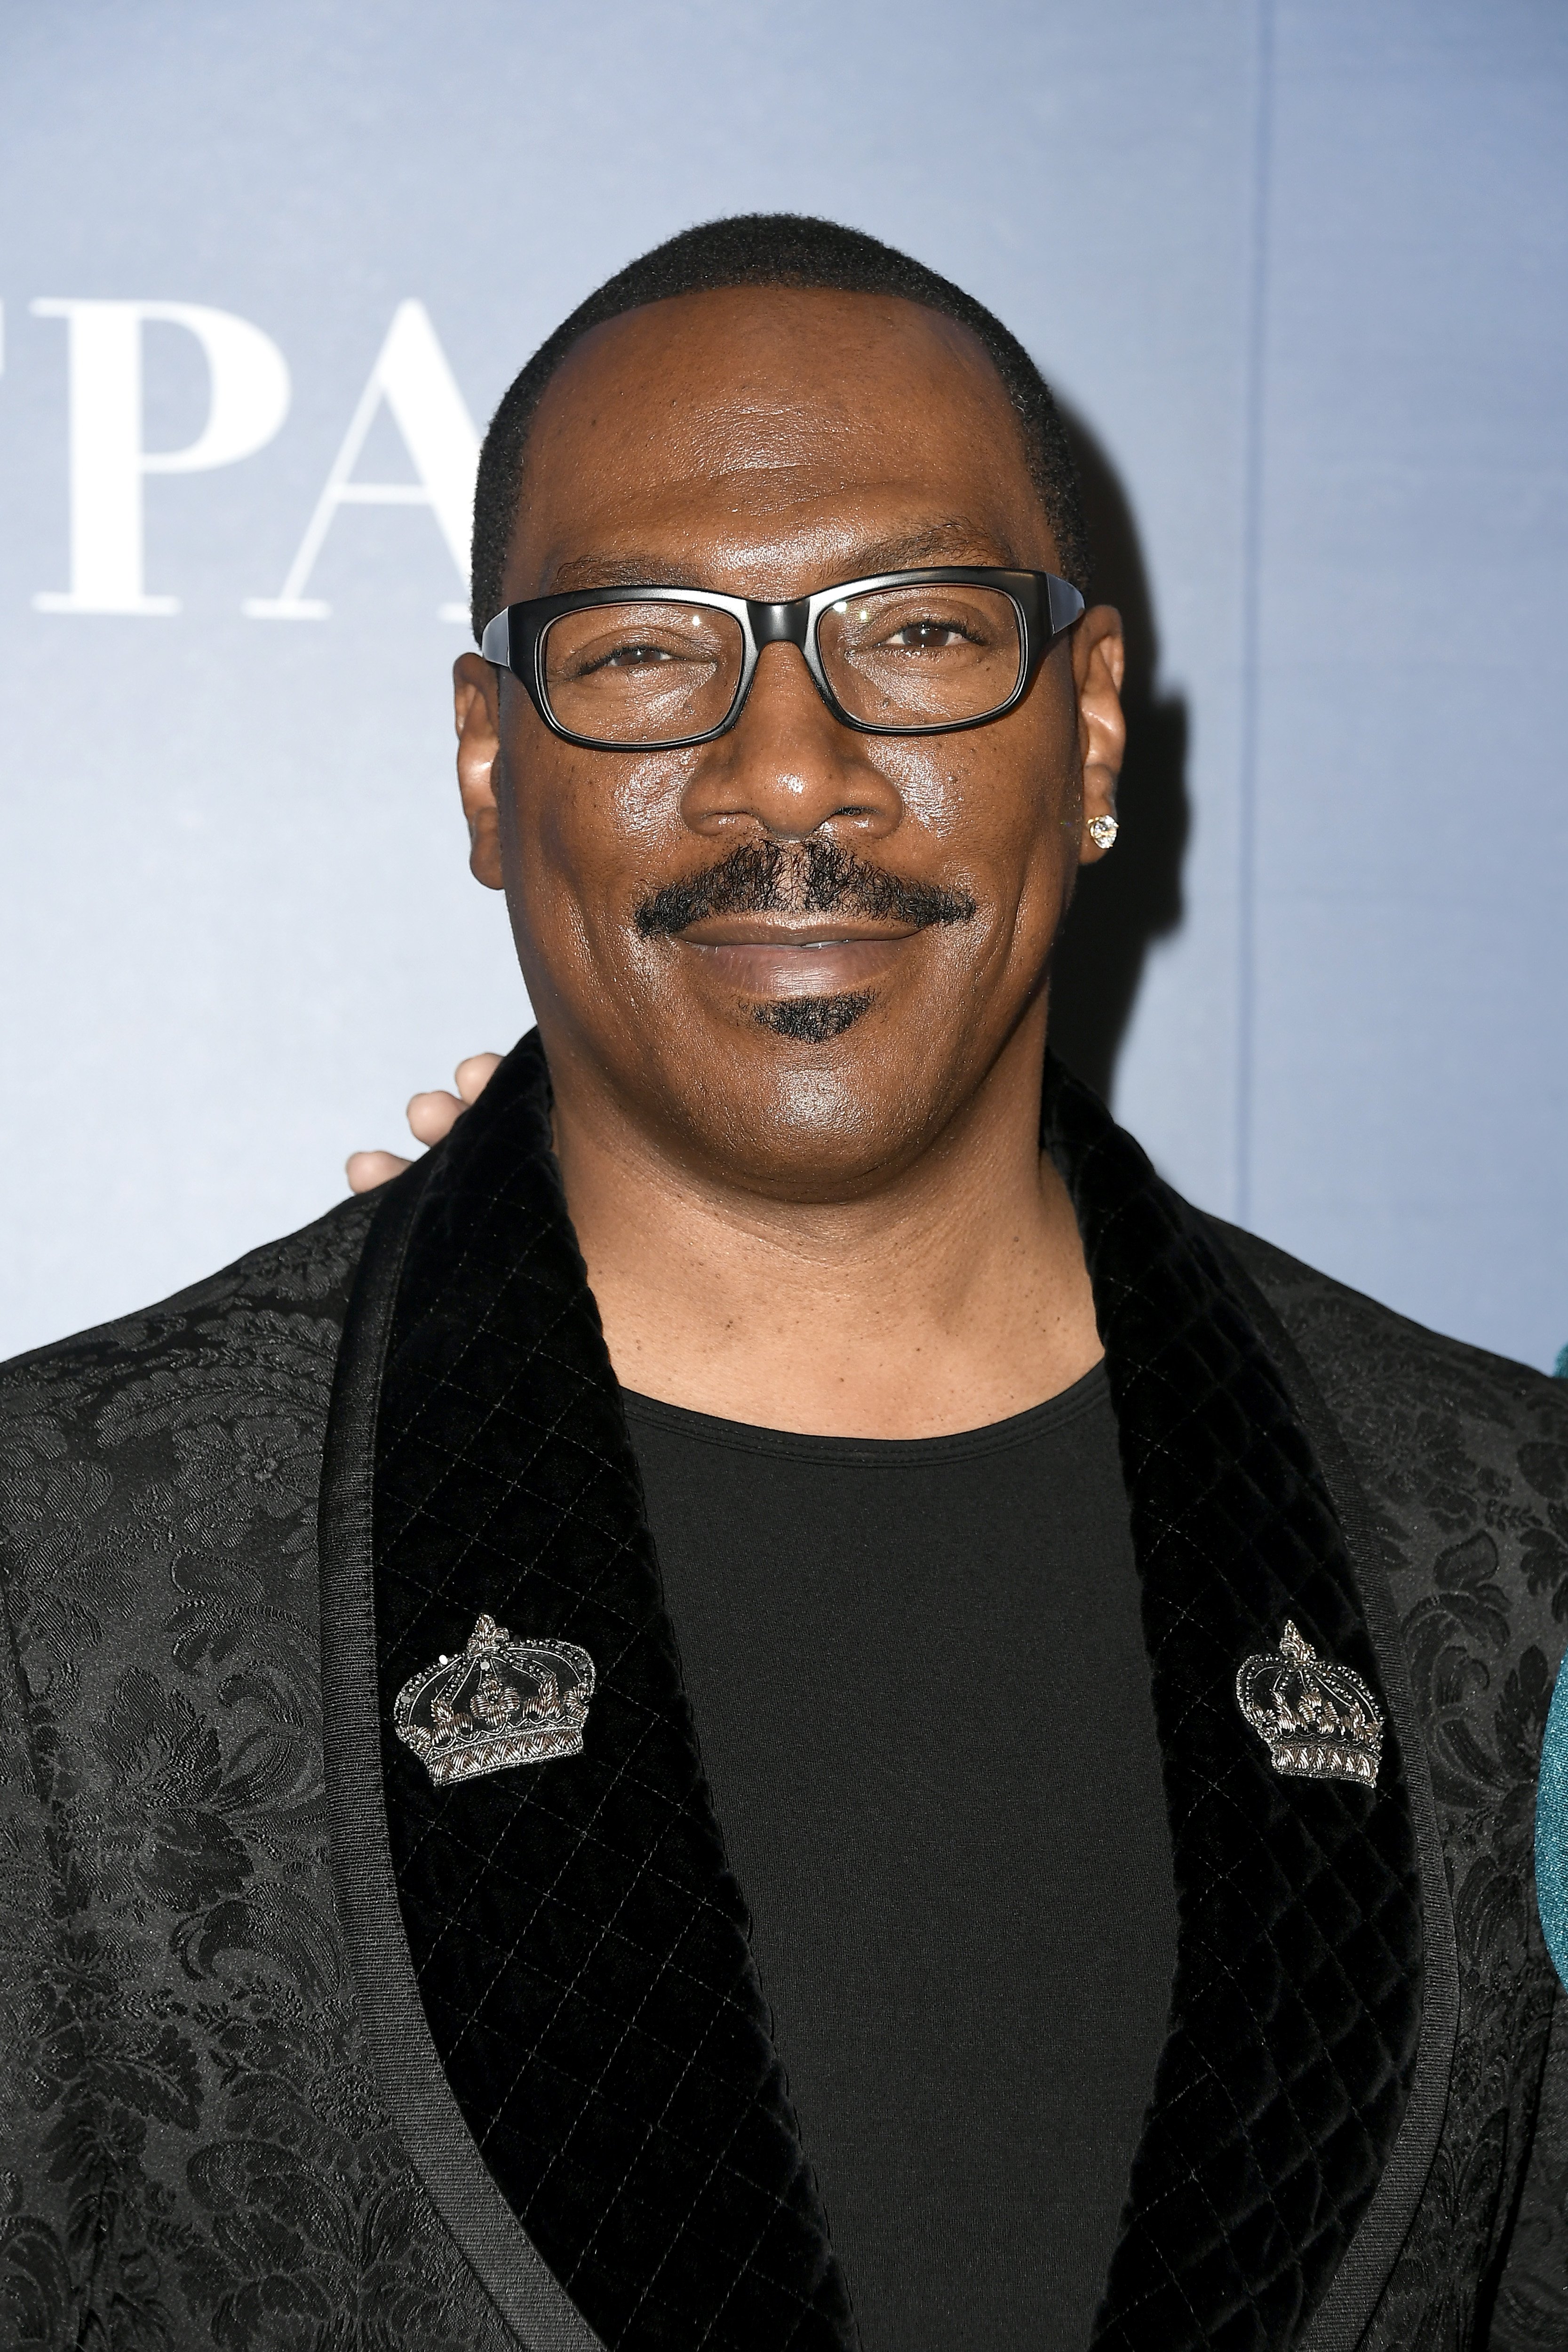 Eddie Murphy at the HFPA/THR TIFF PARTY at the Four Seasons Hotel in Toronto, Canada | Photo by Frazer Harrison/Getty Images